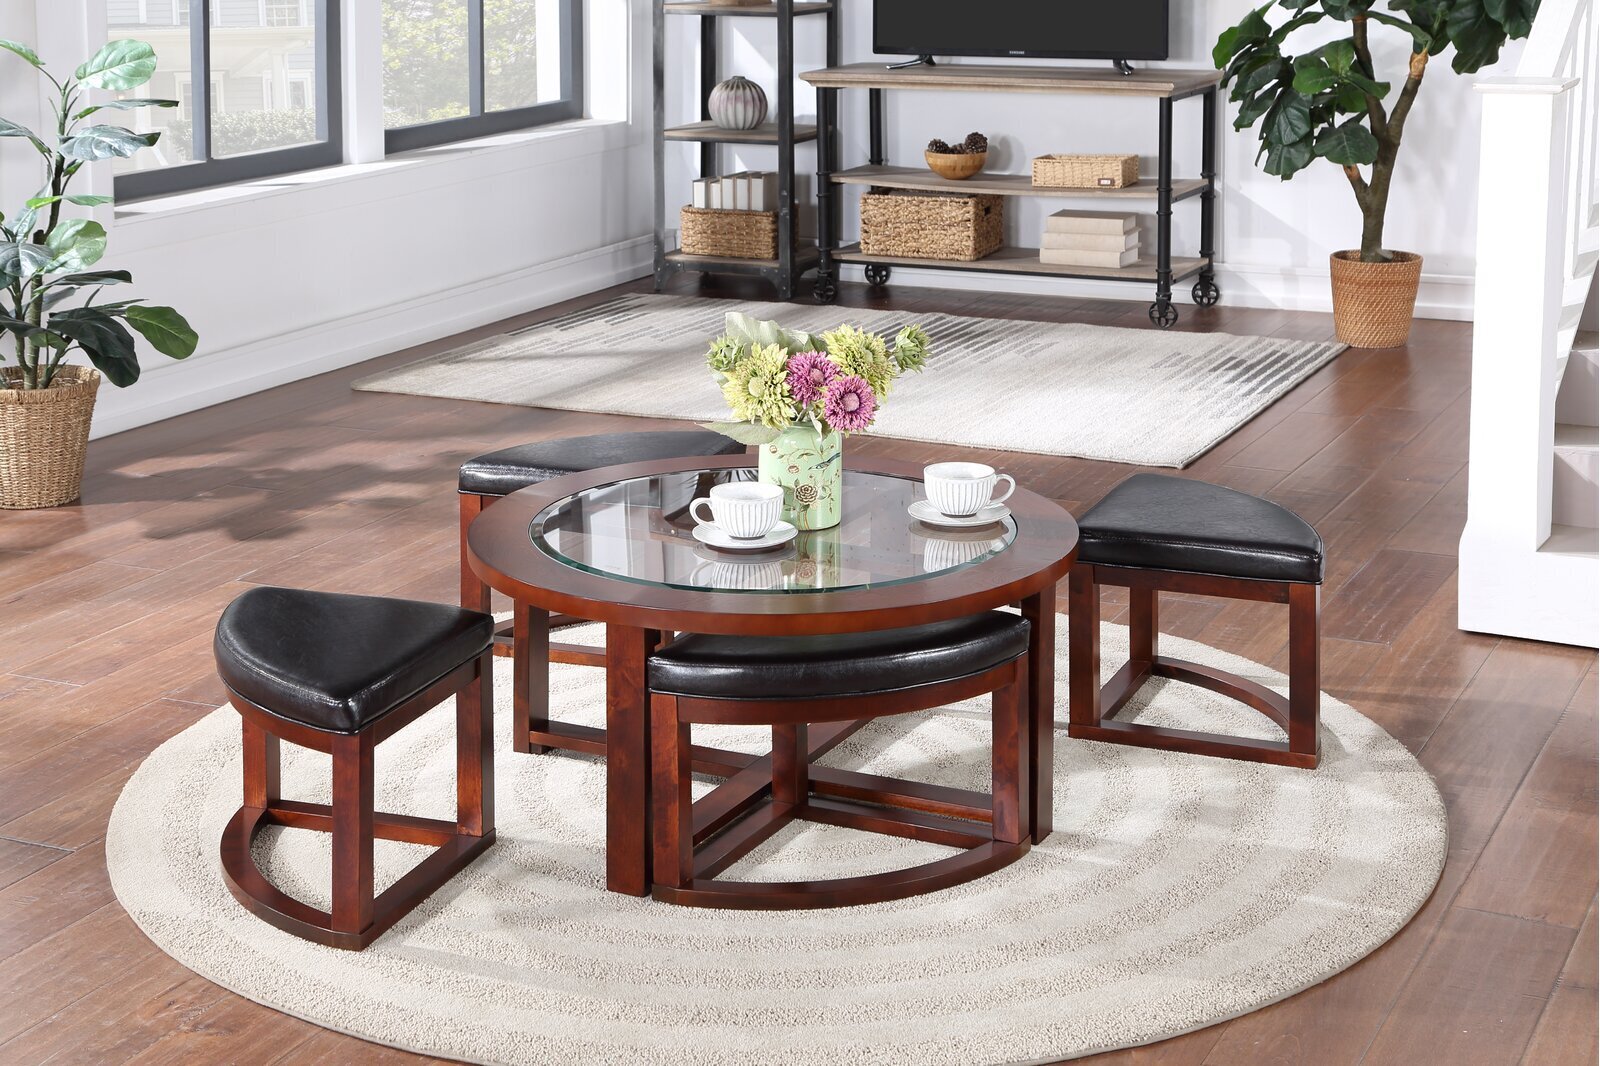 Coffee table with nesting stools for 4